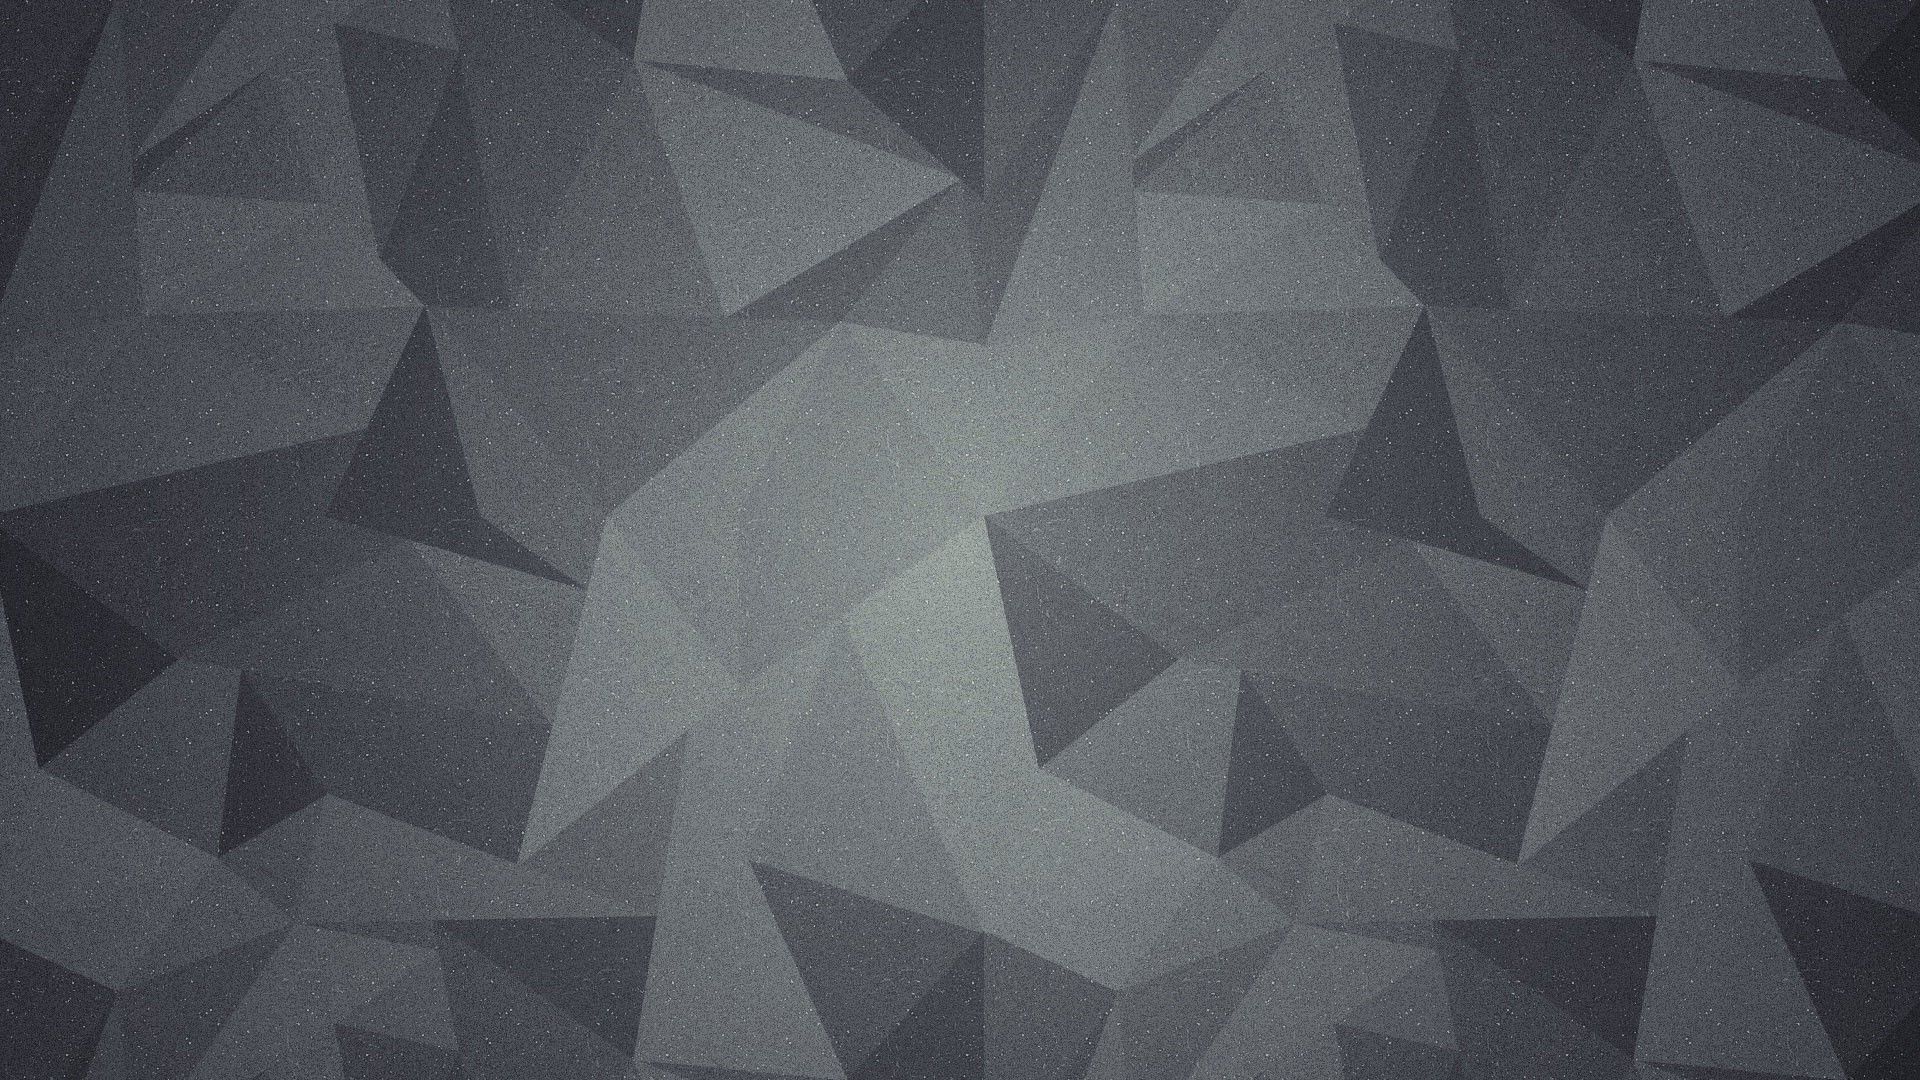 79-792002_grey-polygon-hd-wallpapers-grey-low-poly-background.jpg